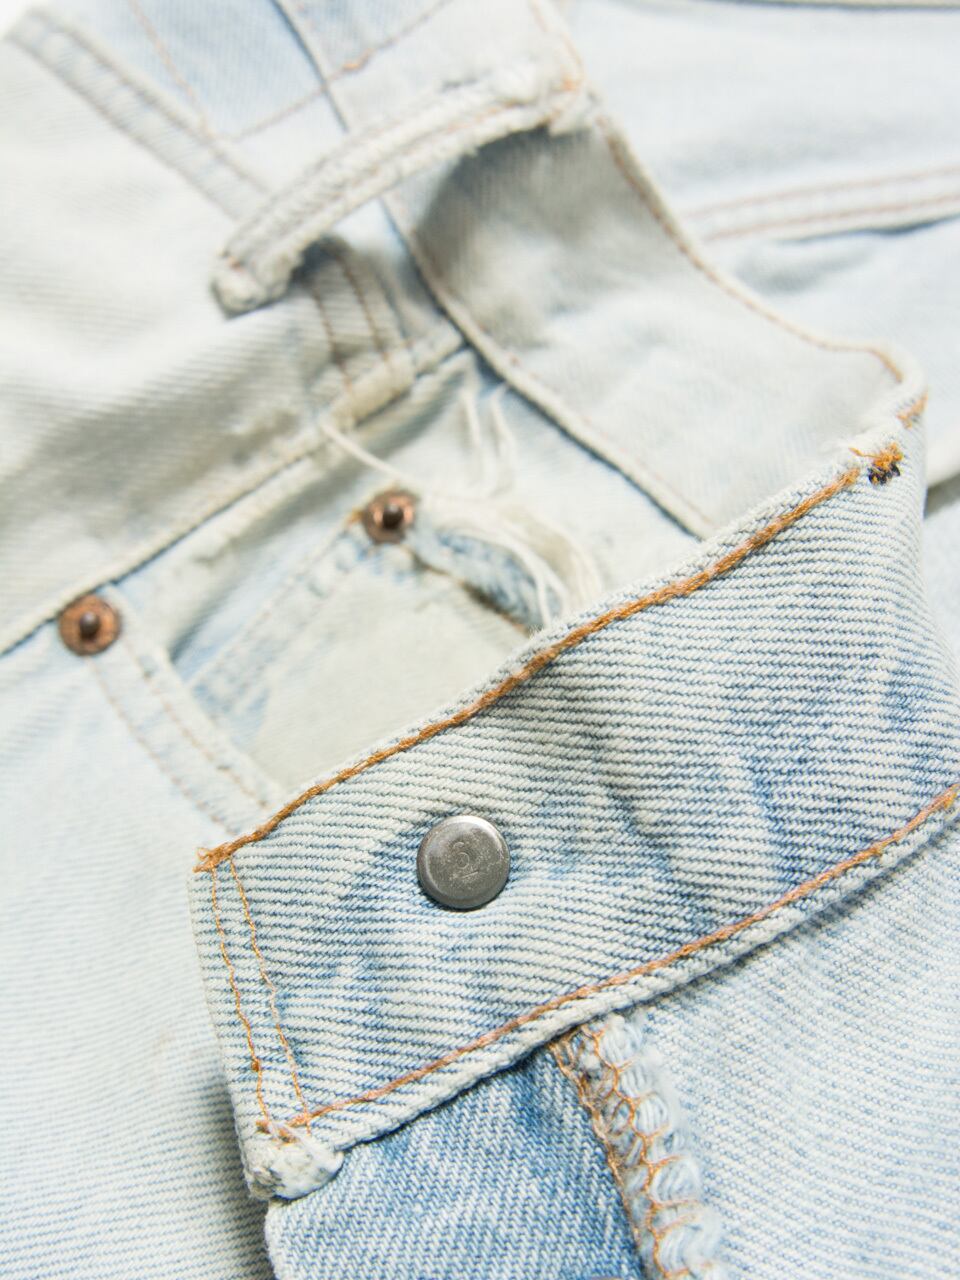 【70s Vintage repaired】Made in USA Levis 501（66後期モデル リーバイス デニム）9b02